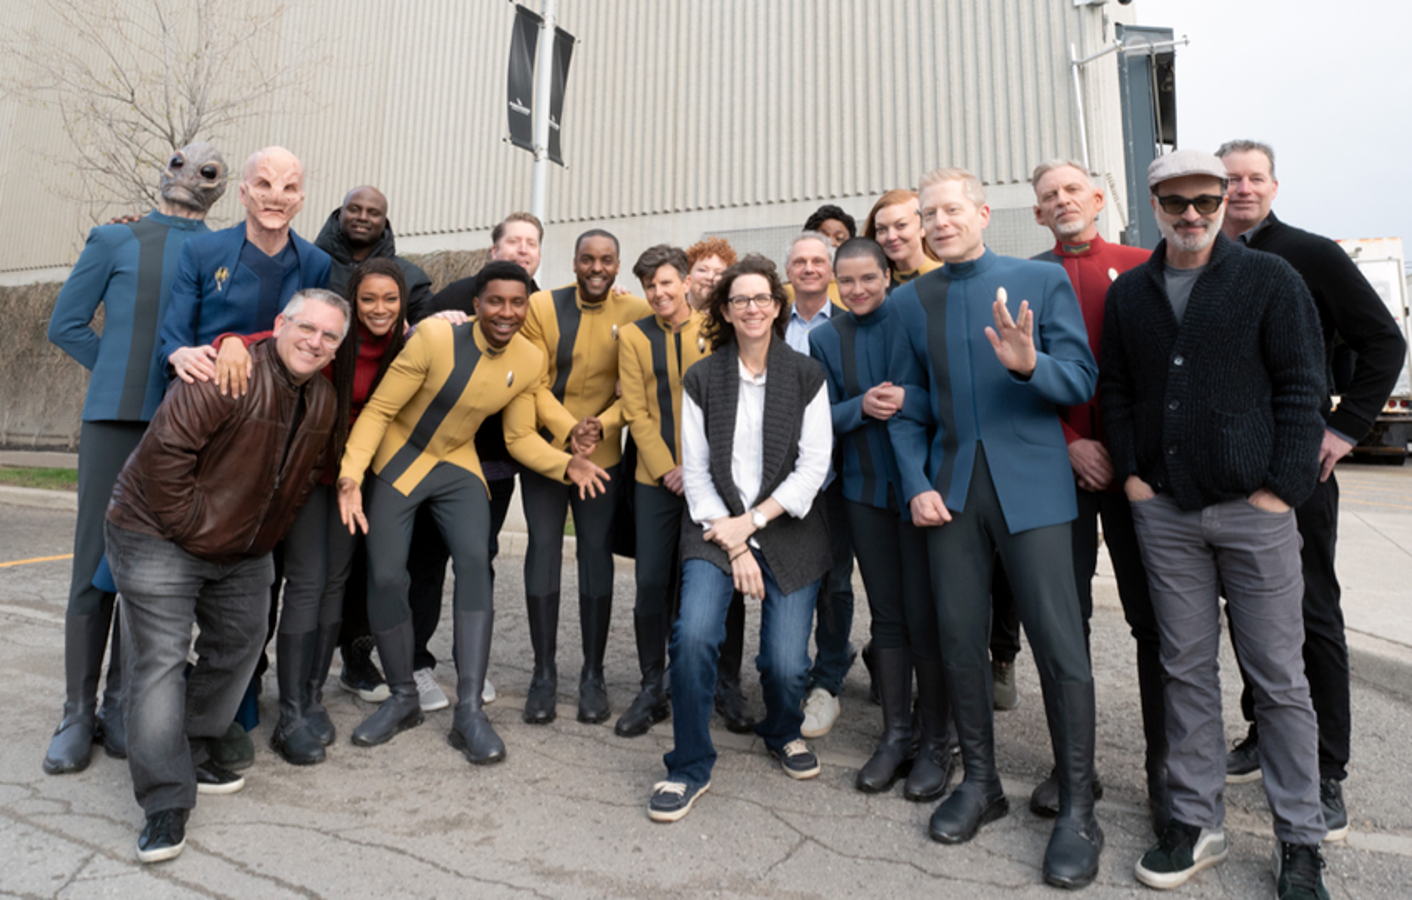 ‘Star Trek: Discovery’ Co-Showrunner Teases The Final Episodes And Her Message For Fans